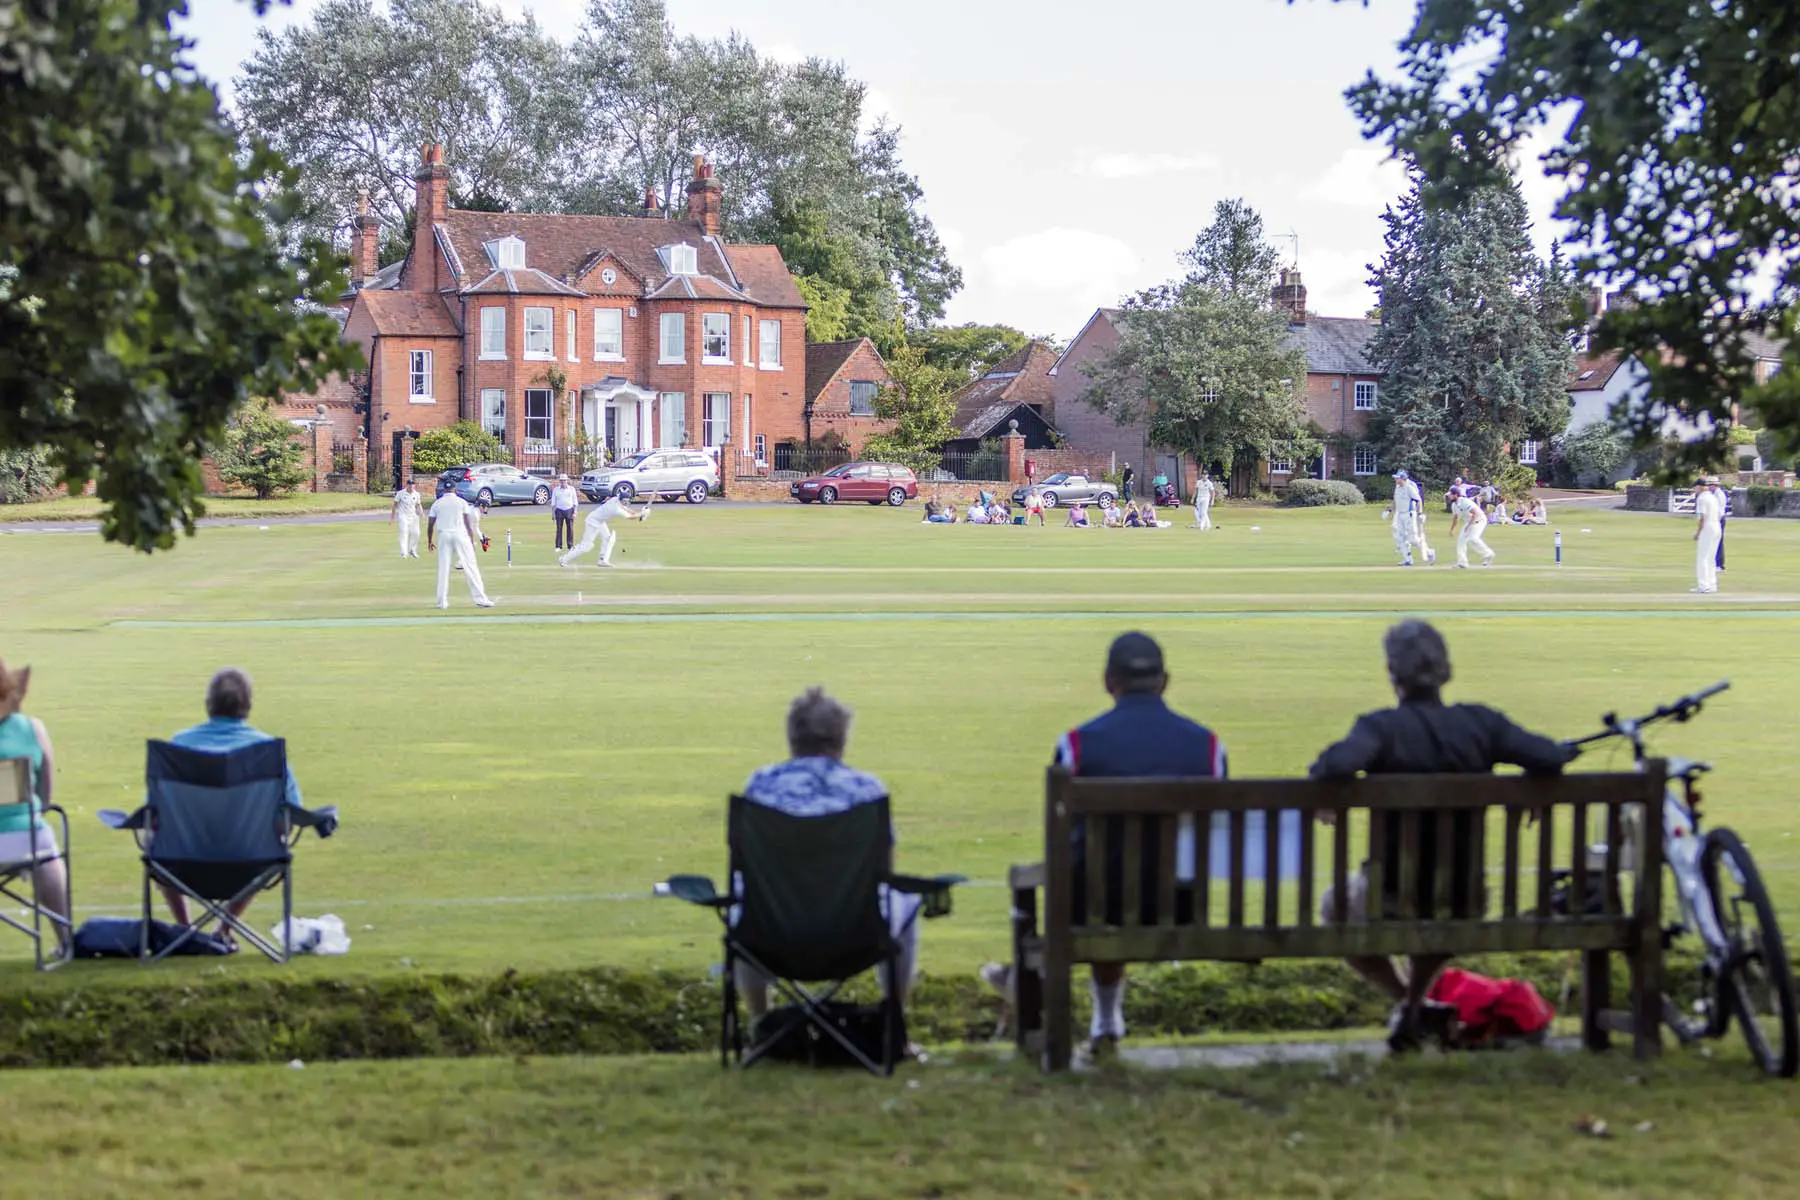 small crowd watching cricket match in English village